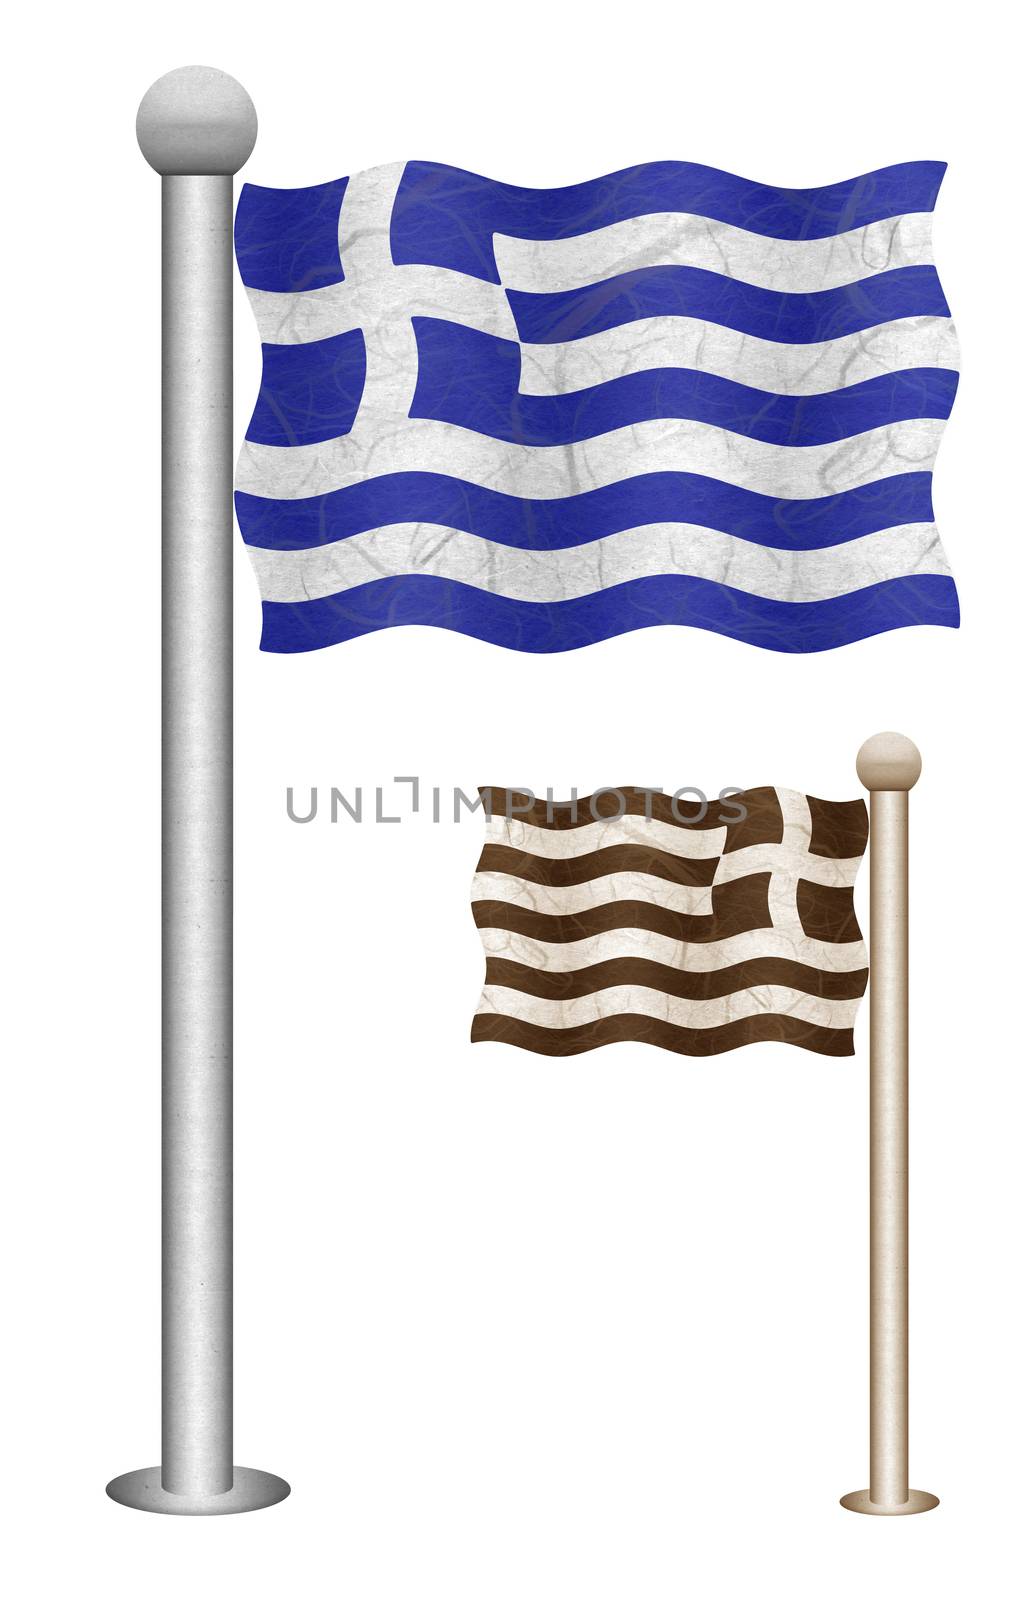 Greece flag waving on the wind. Flags of countries in Europe. Mulberry paper on white background.